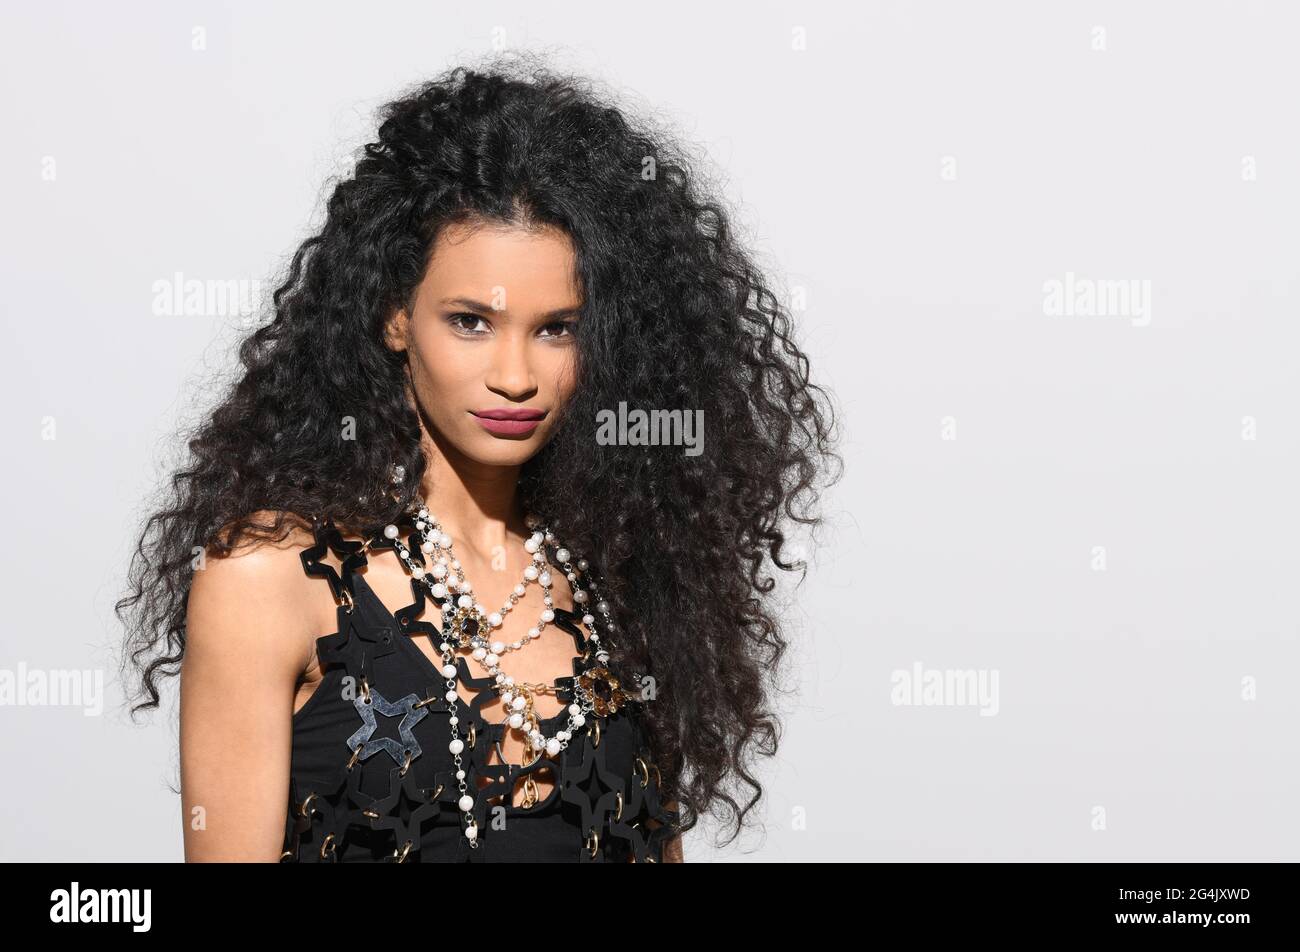 Elegant black woman in a black ensemble with pearl necklace looks into camera Stock Photo